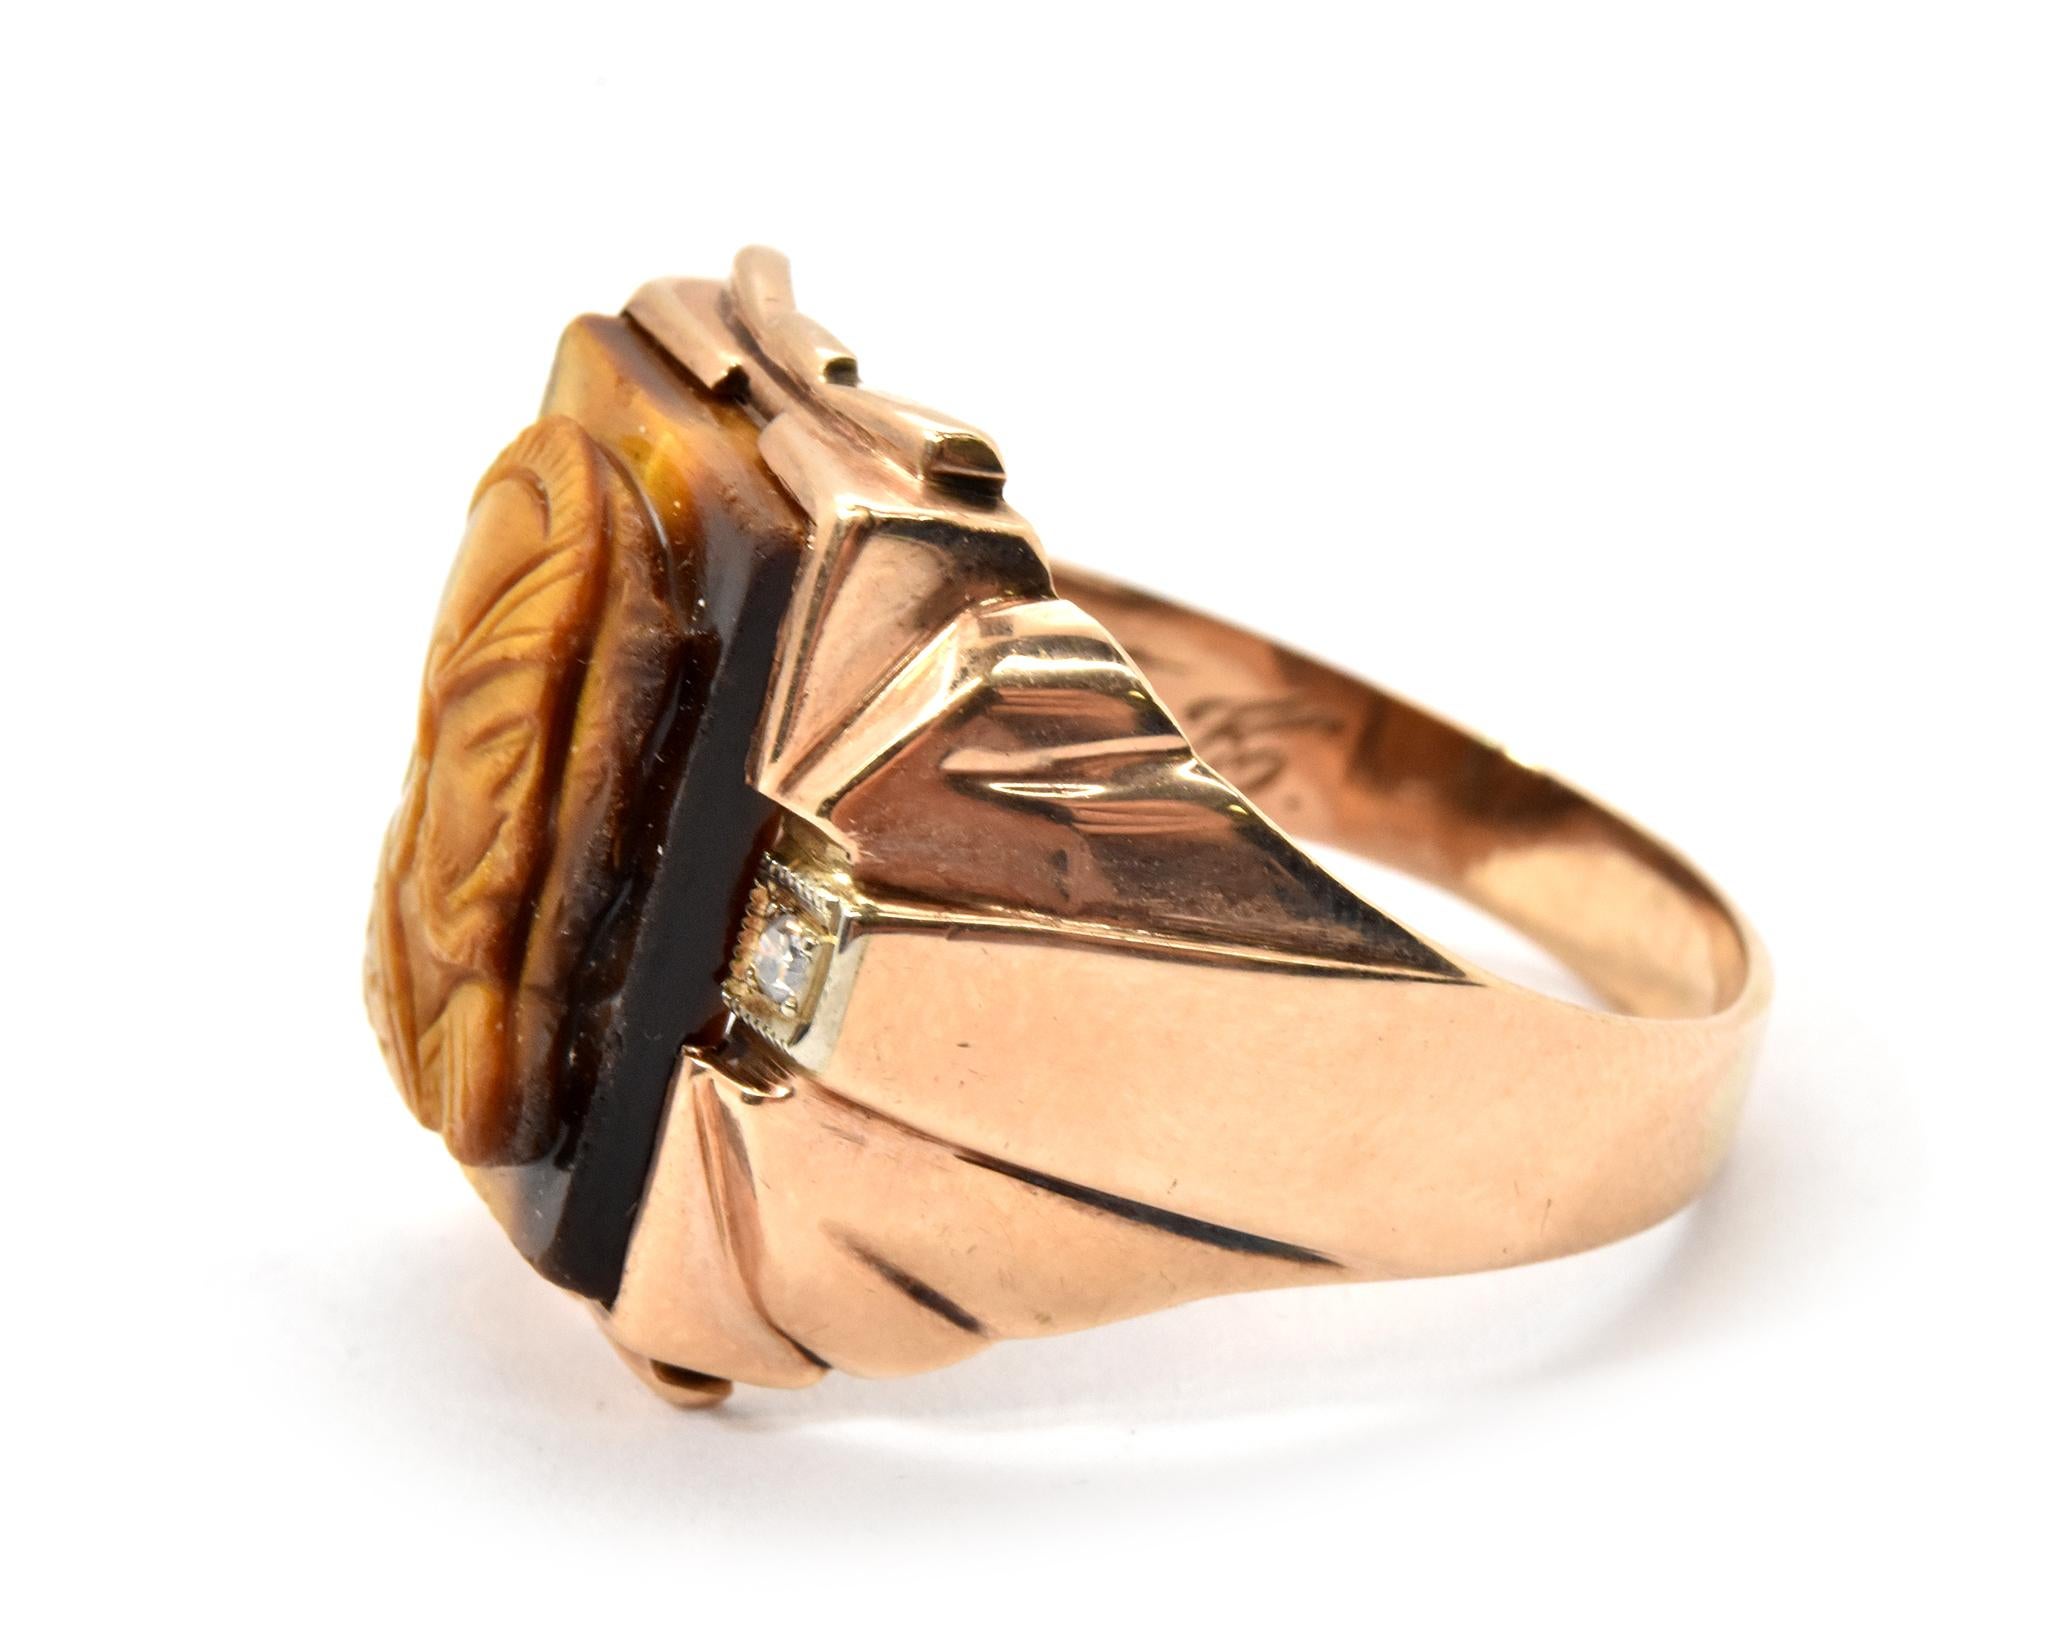 This ring is made in 10k yellow gold, and it holds a carved tiger's eye stone. The carving features two men soldier's silhouettes. The ring measures 19.5mm wide and it weighs 7.3 grams. The ring is a size 12.5.